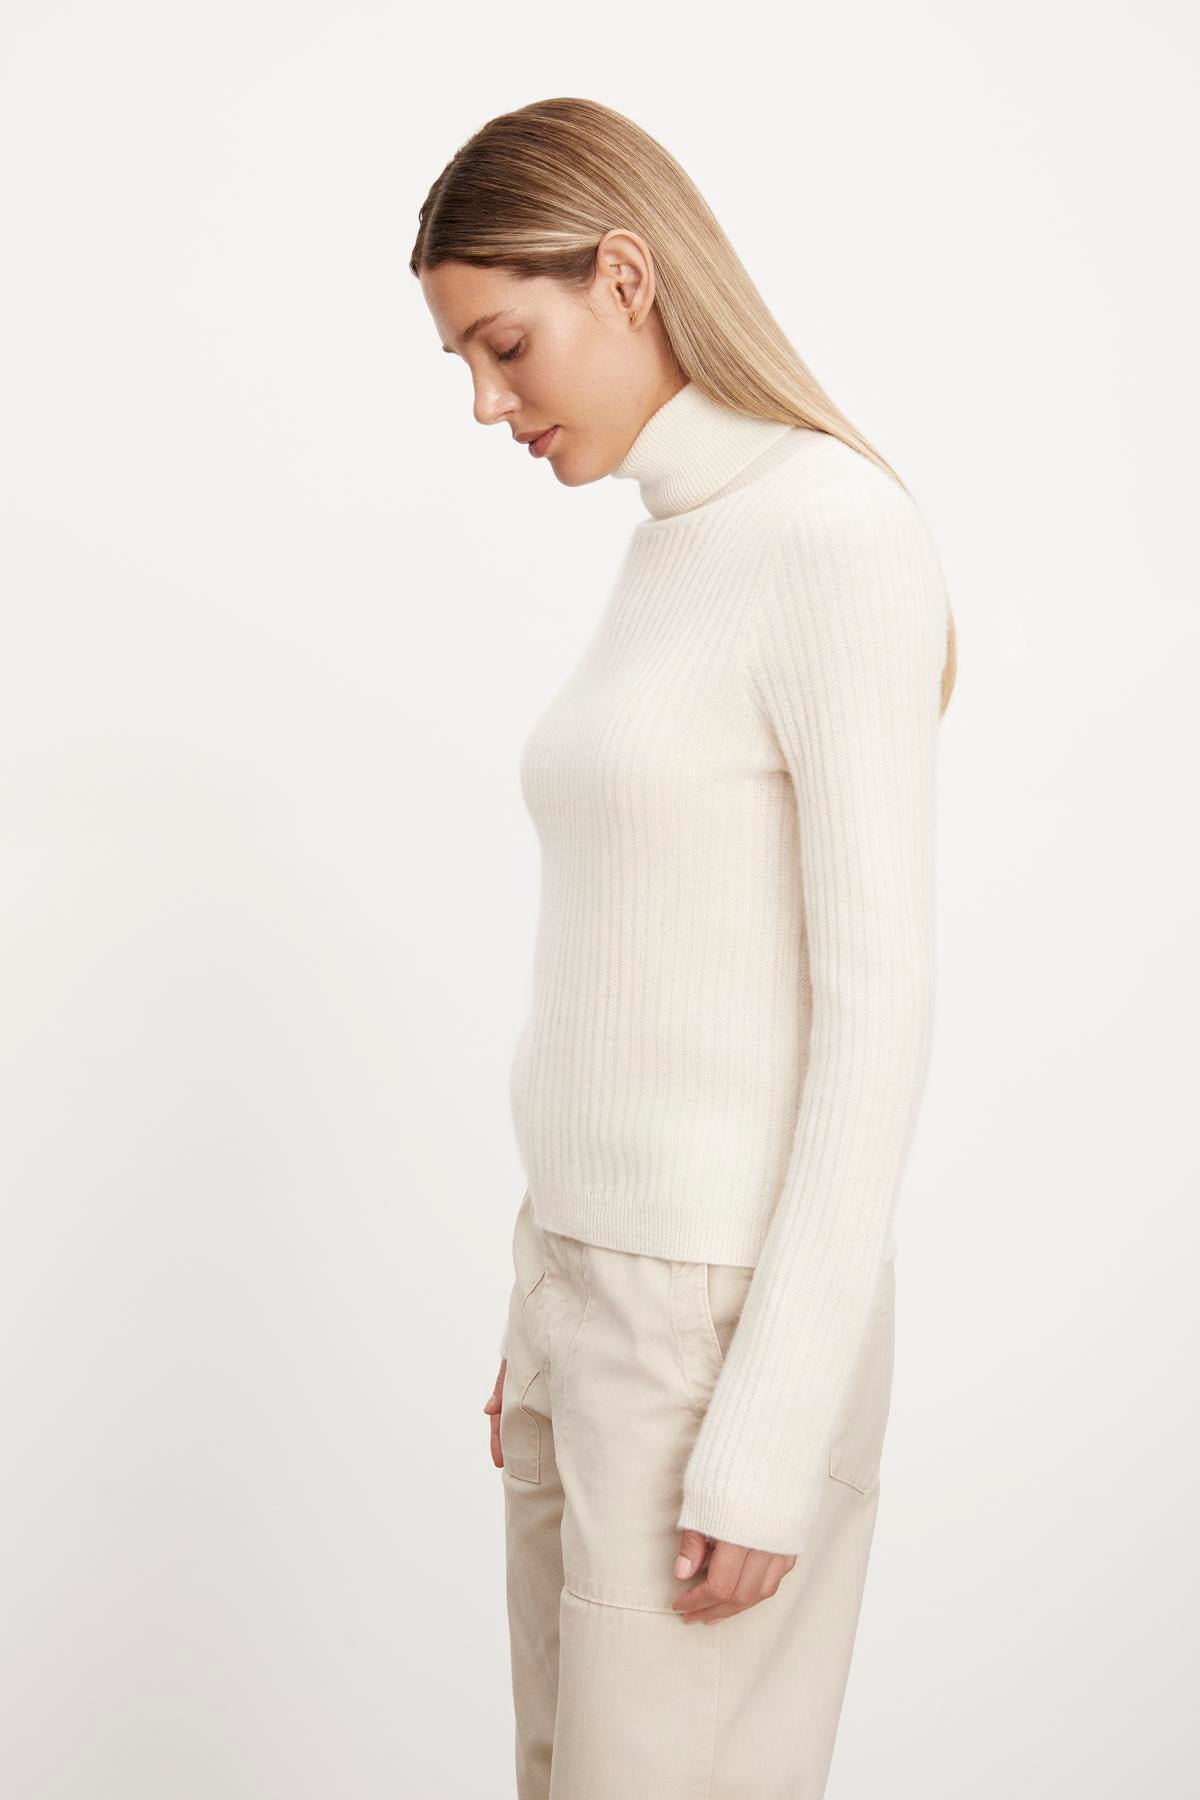   The model is wearing a white LORI CASHMERE TURTLENECK SWEATER by Velvet by Graham & Spencer and beige pants. 